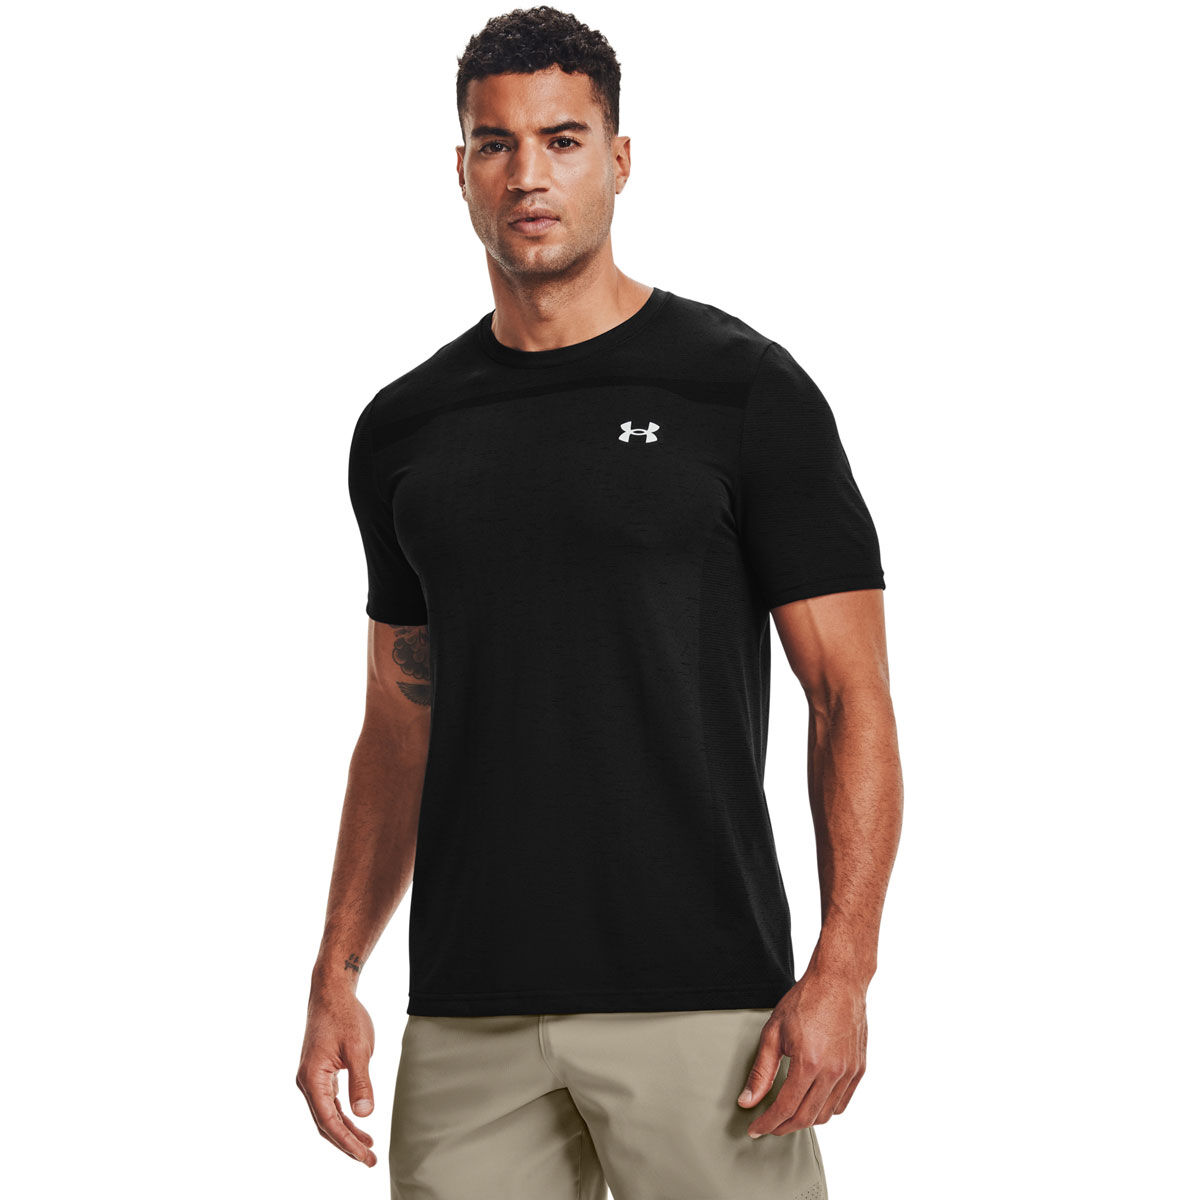 Under Armour, Shirts